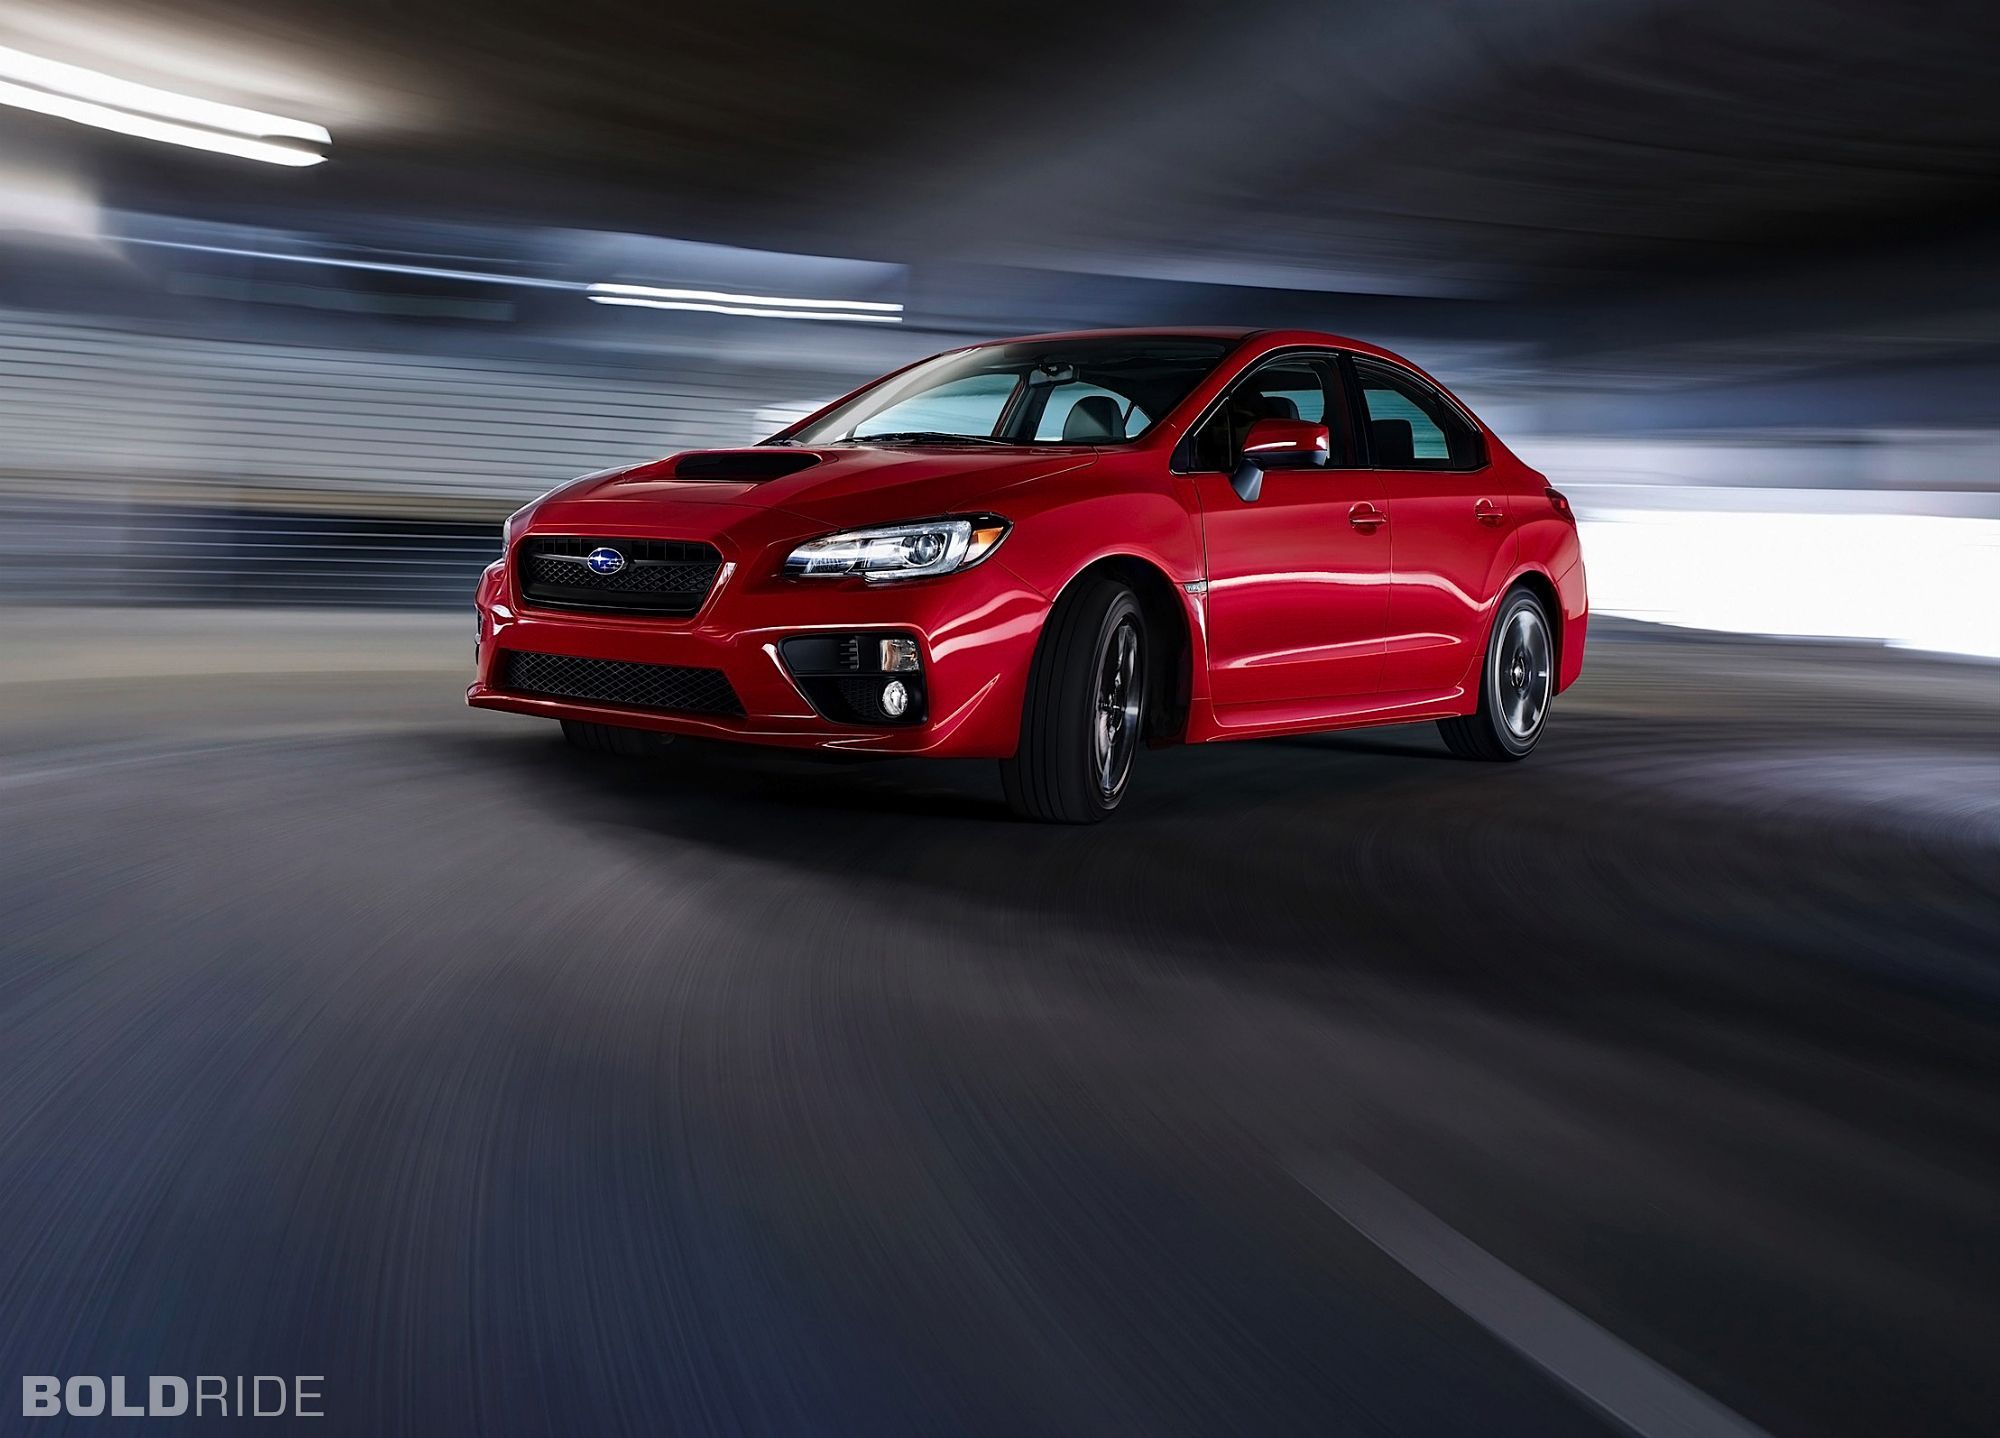 2015 Subaru WRX Images | Pictures and Videos